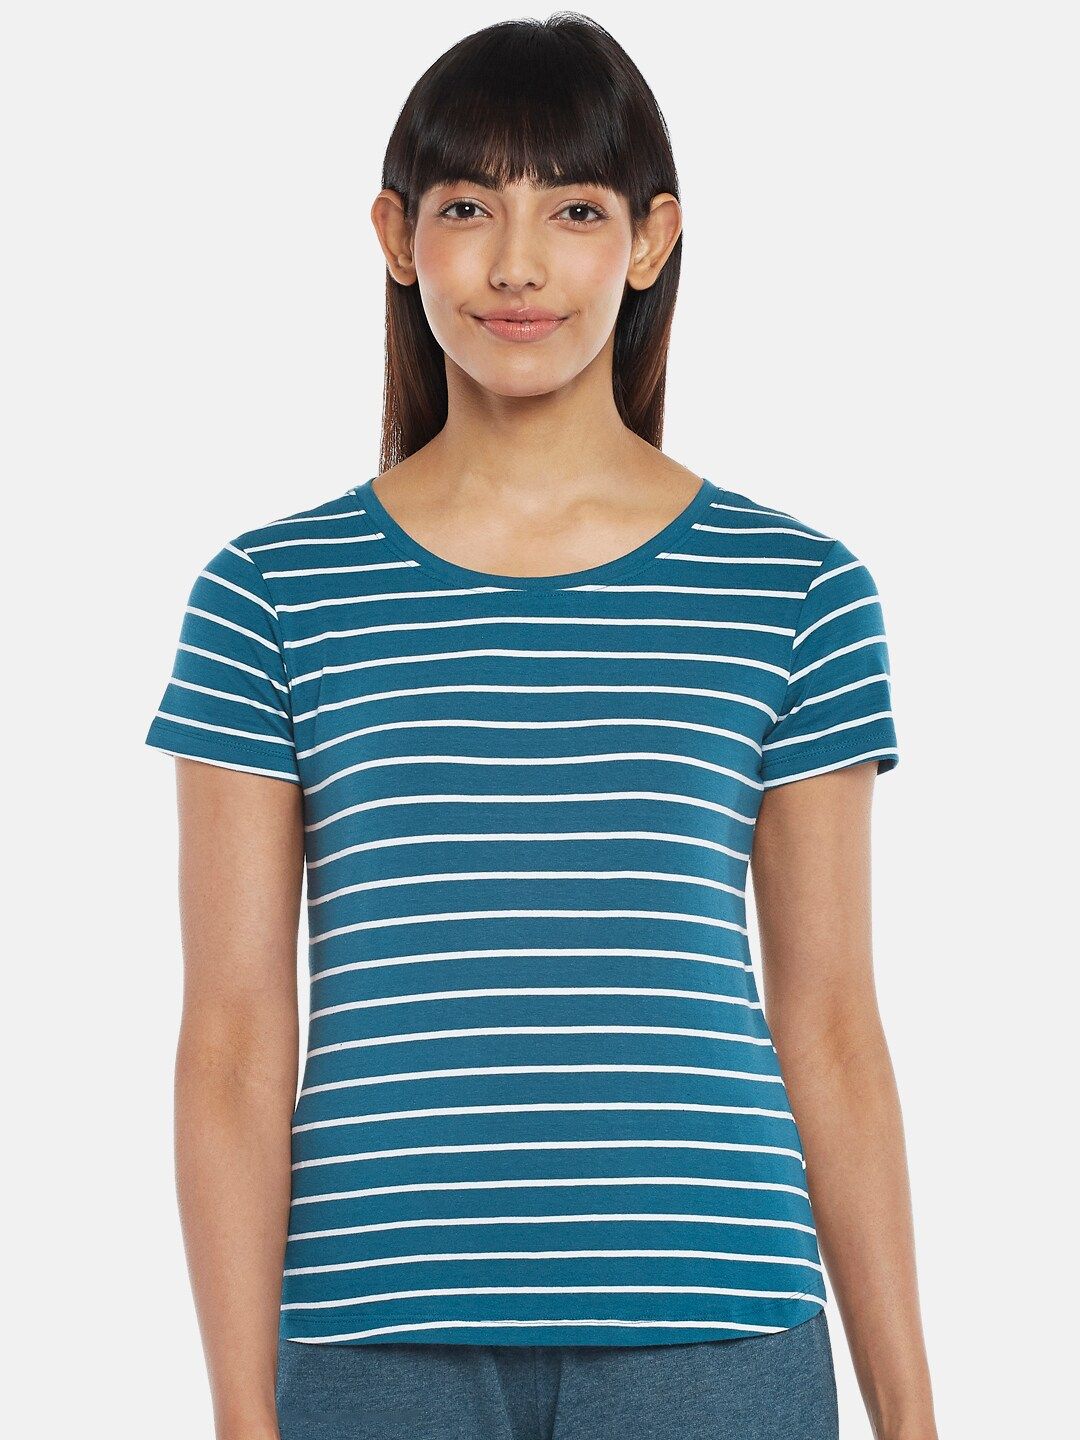 Dreamz by Pantaloons Blue Striped Top Price in India